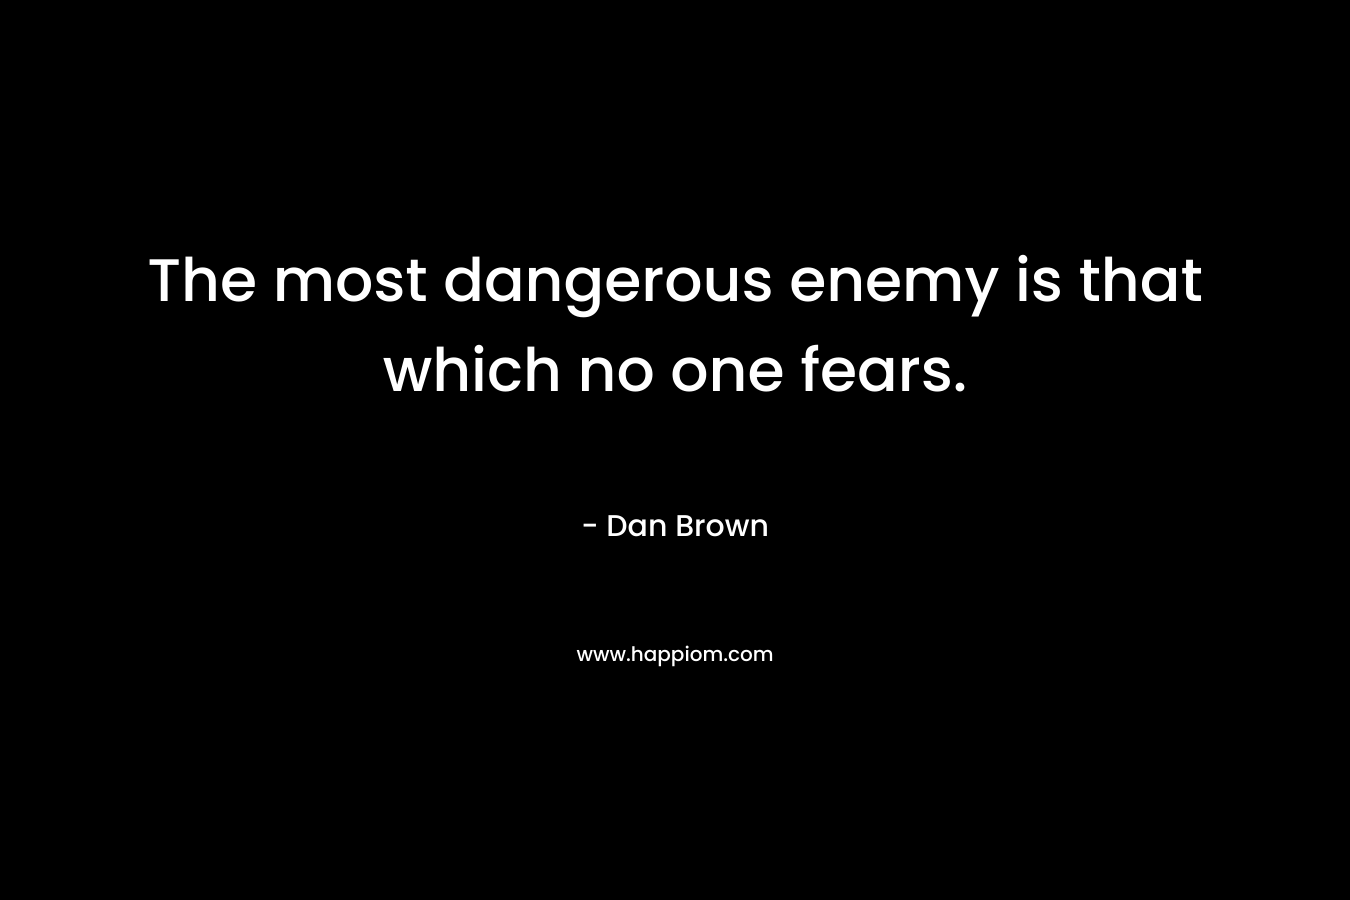 The most dangerous enemy is that which no one fears.